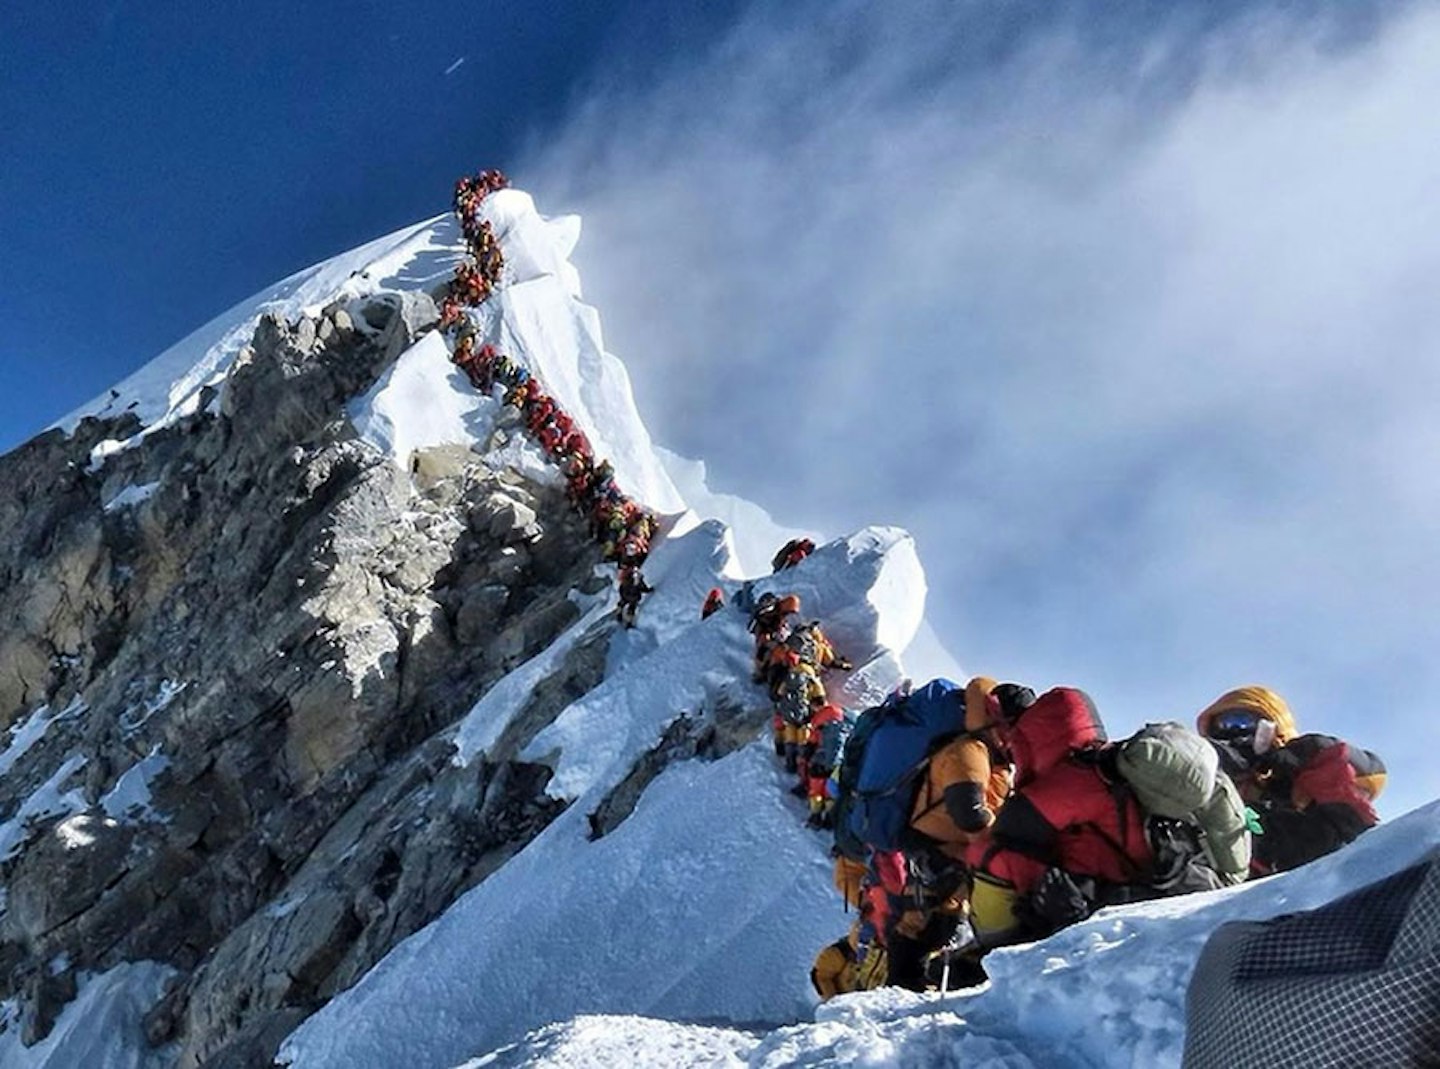 Nirmal Purja MBE’s recent image of queues on the Hillary Step near Everest’s summit, which has sent shockwaves around the world.